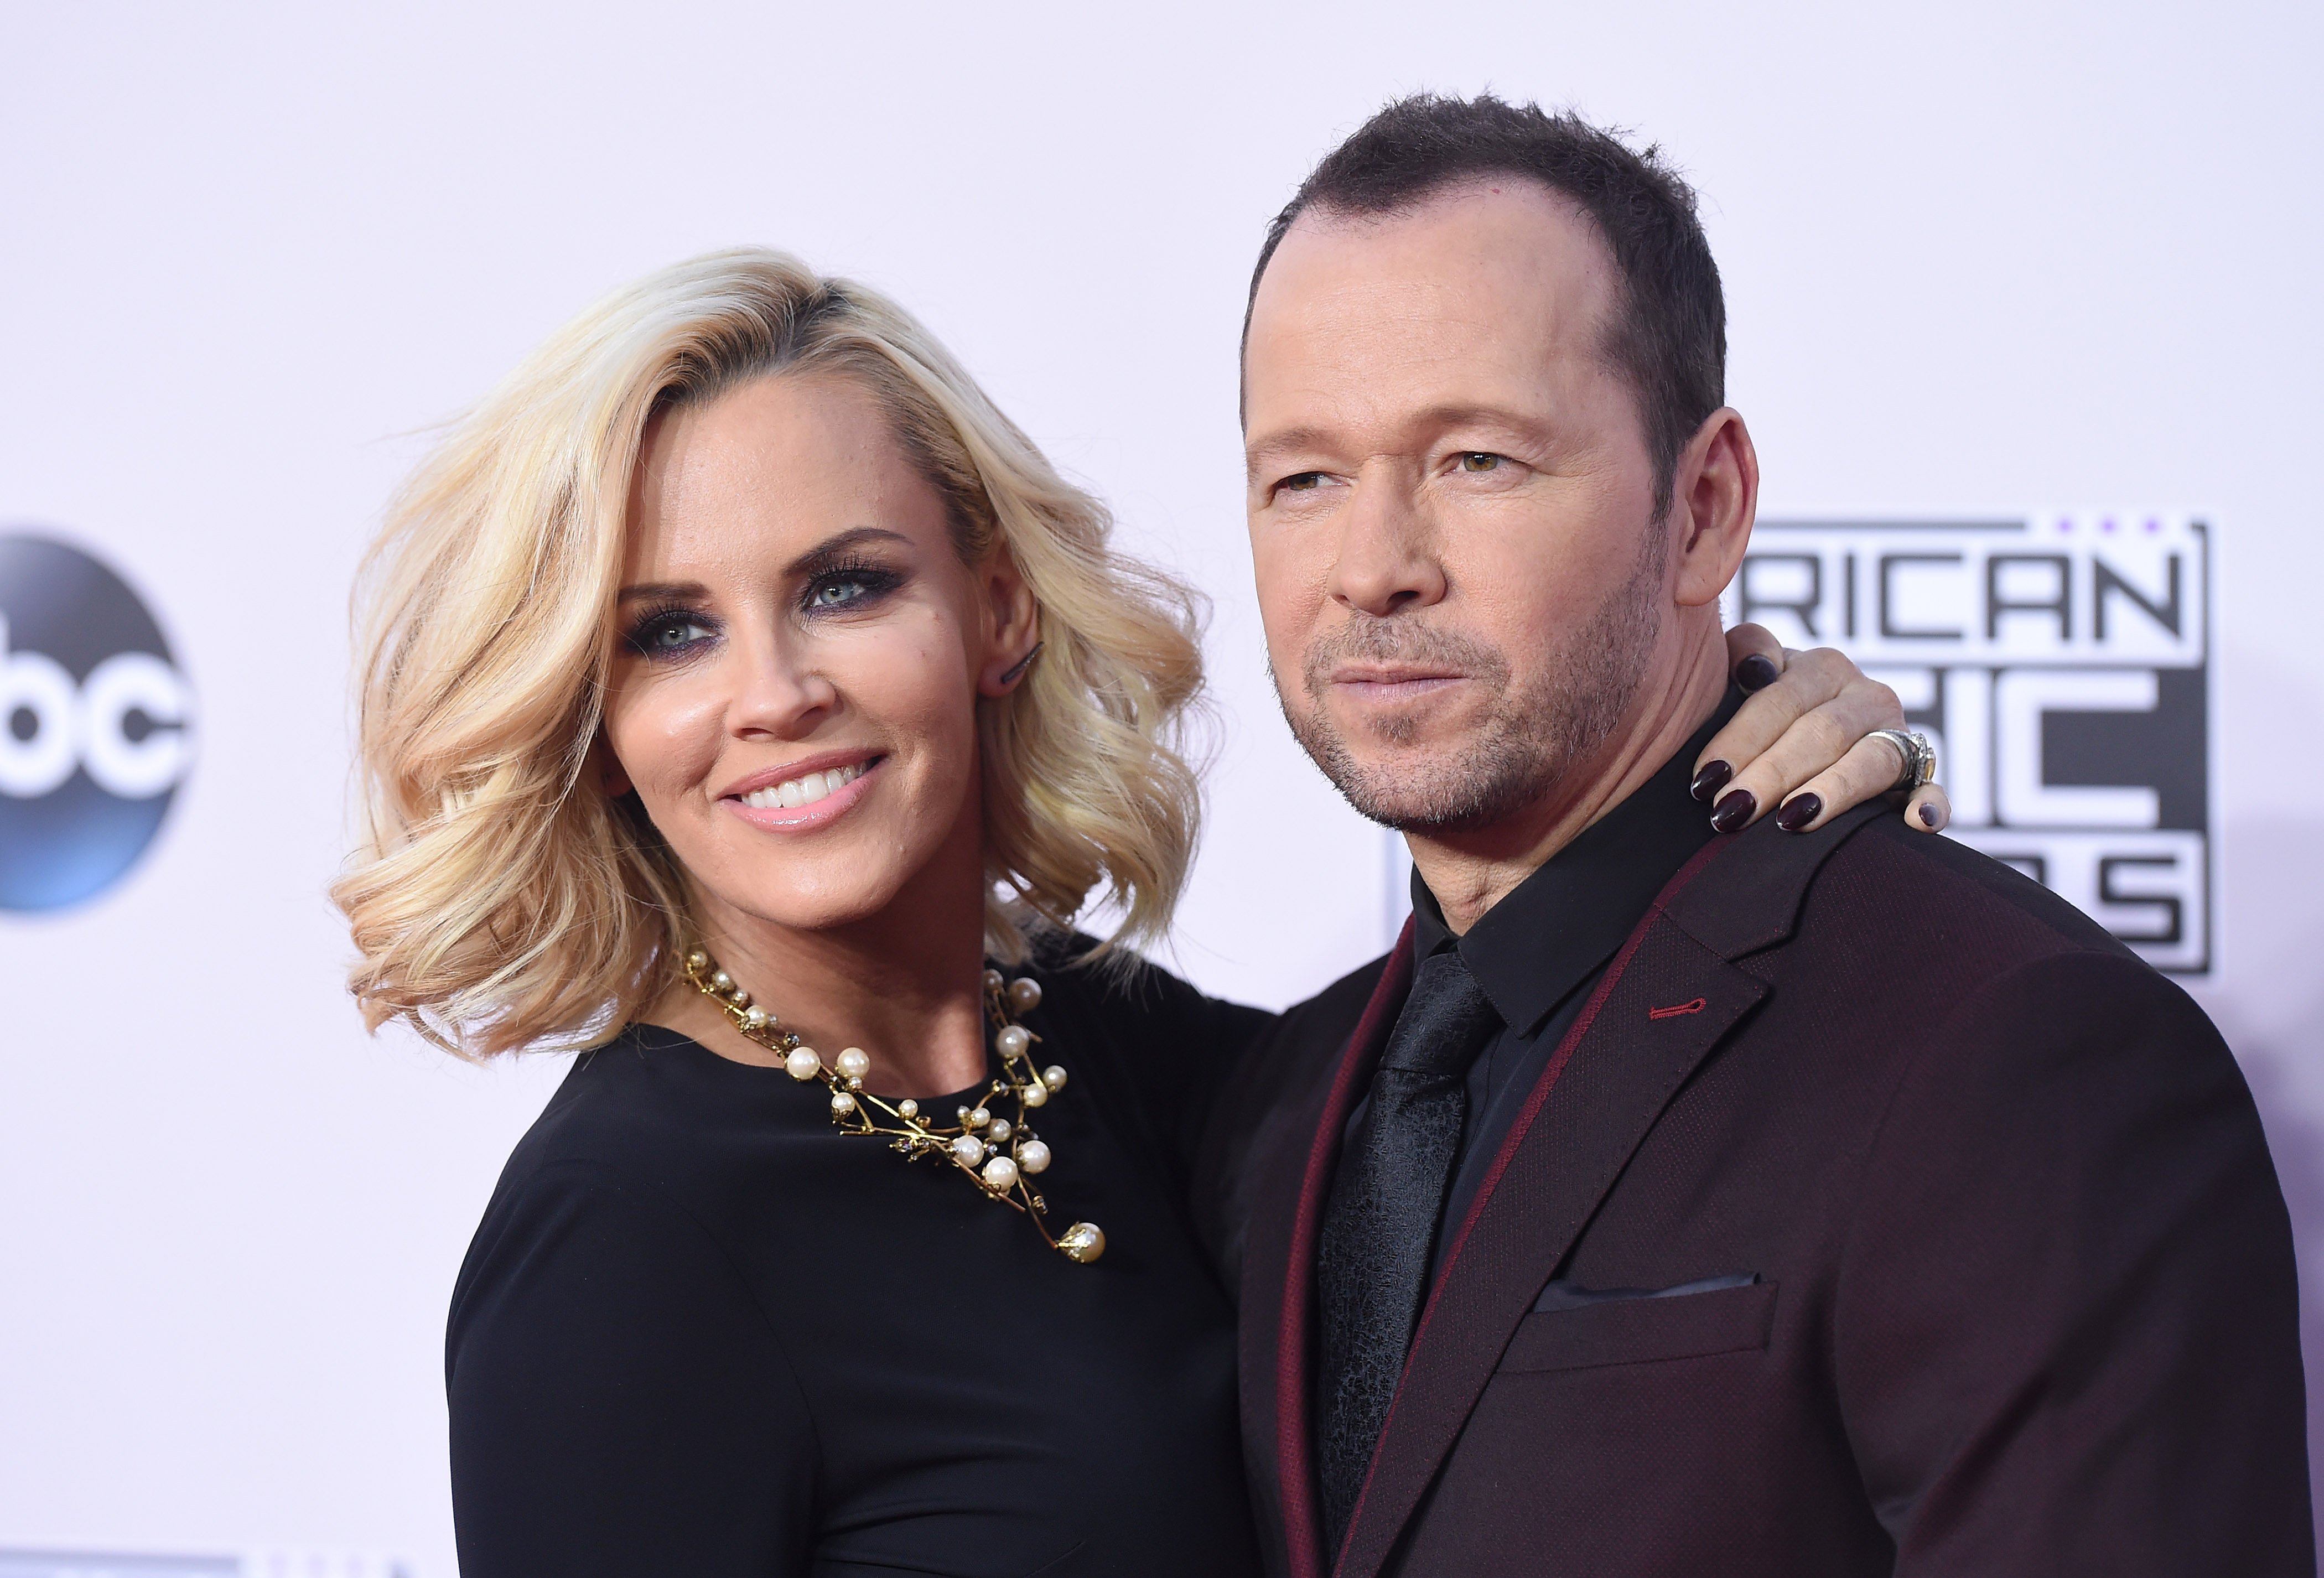 Jenny McCarthy and actor/singer Donnie Wahlberg arrive at the 2014 American Music Awards at Nokia Theatre L.A. Live on November 23, 2014 in Los Angeles, California | Source: Getty Images